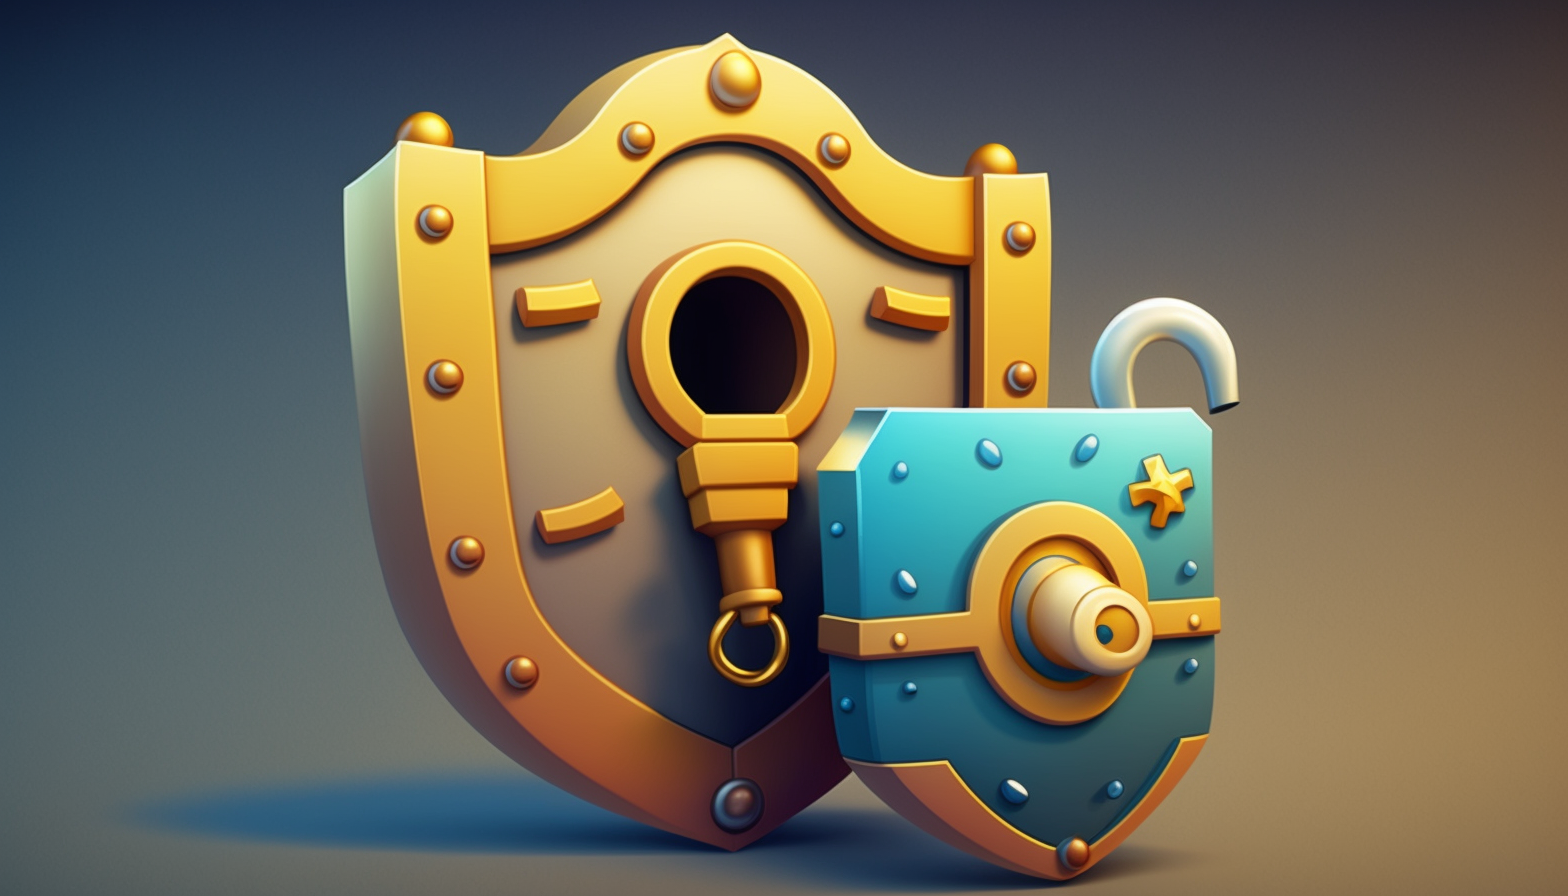 A cartoon image of a lock and key being protected by a shield to represent password security and protection.